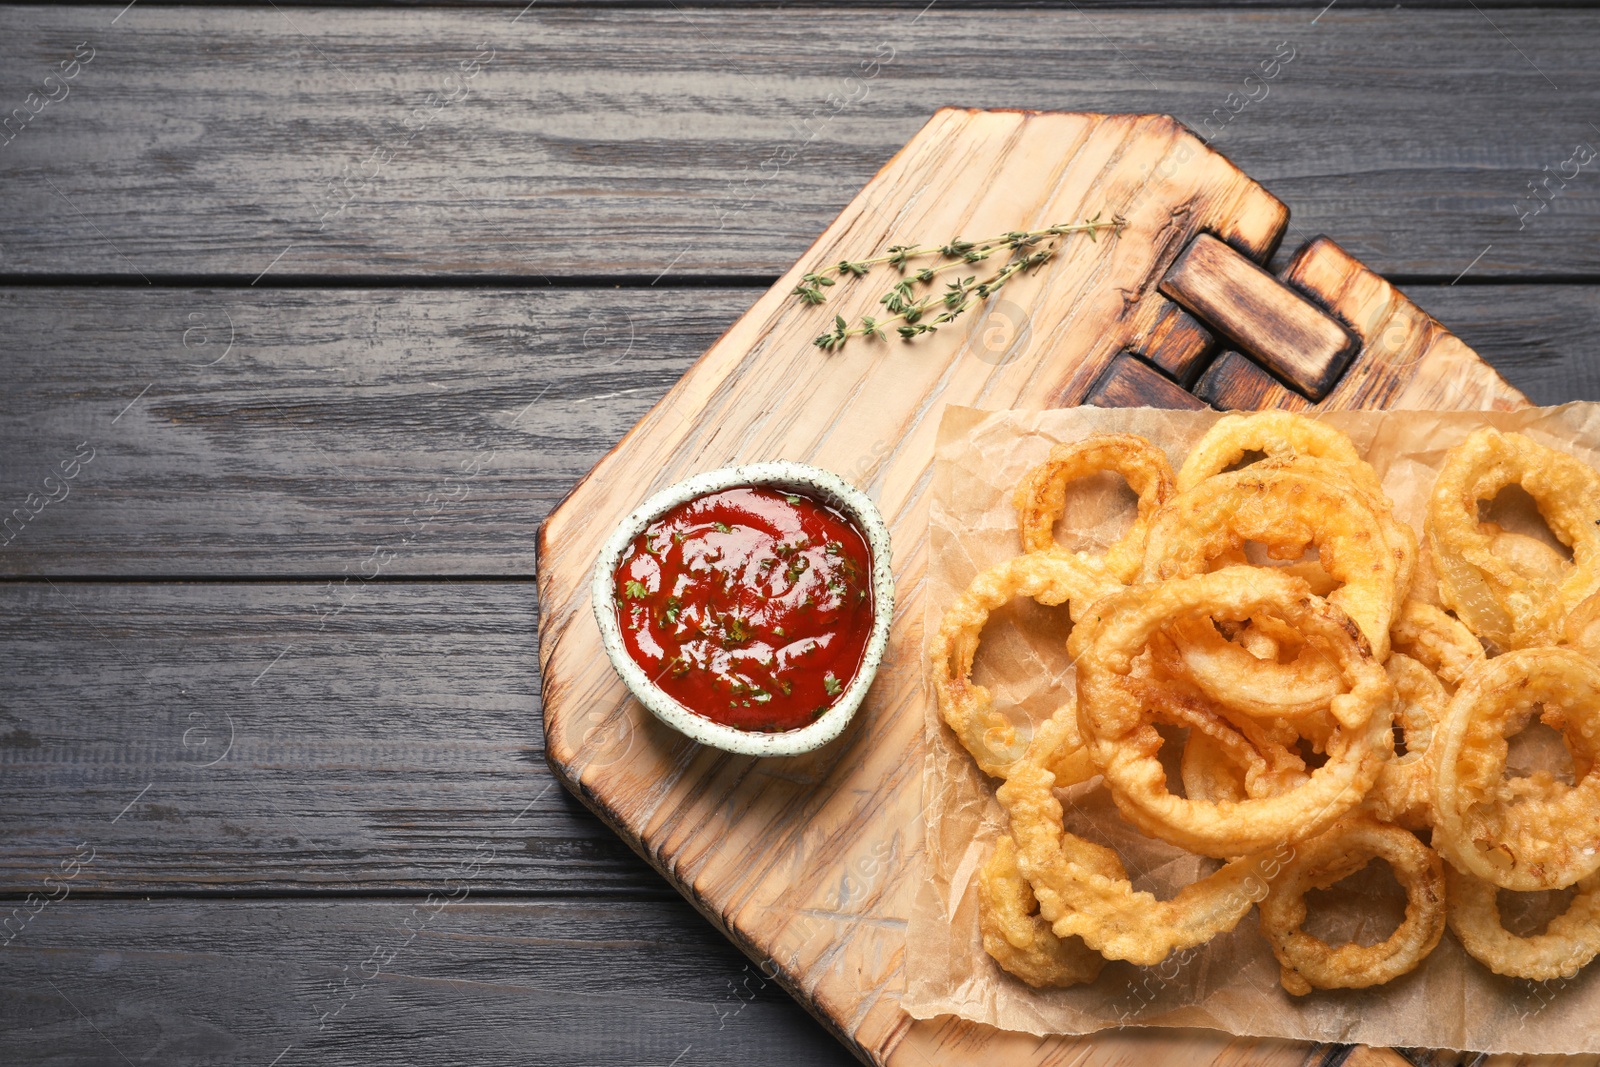 Photo of Homemade crunchy fried onion rings and sauce on wooden background, top view. Space for text